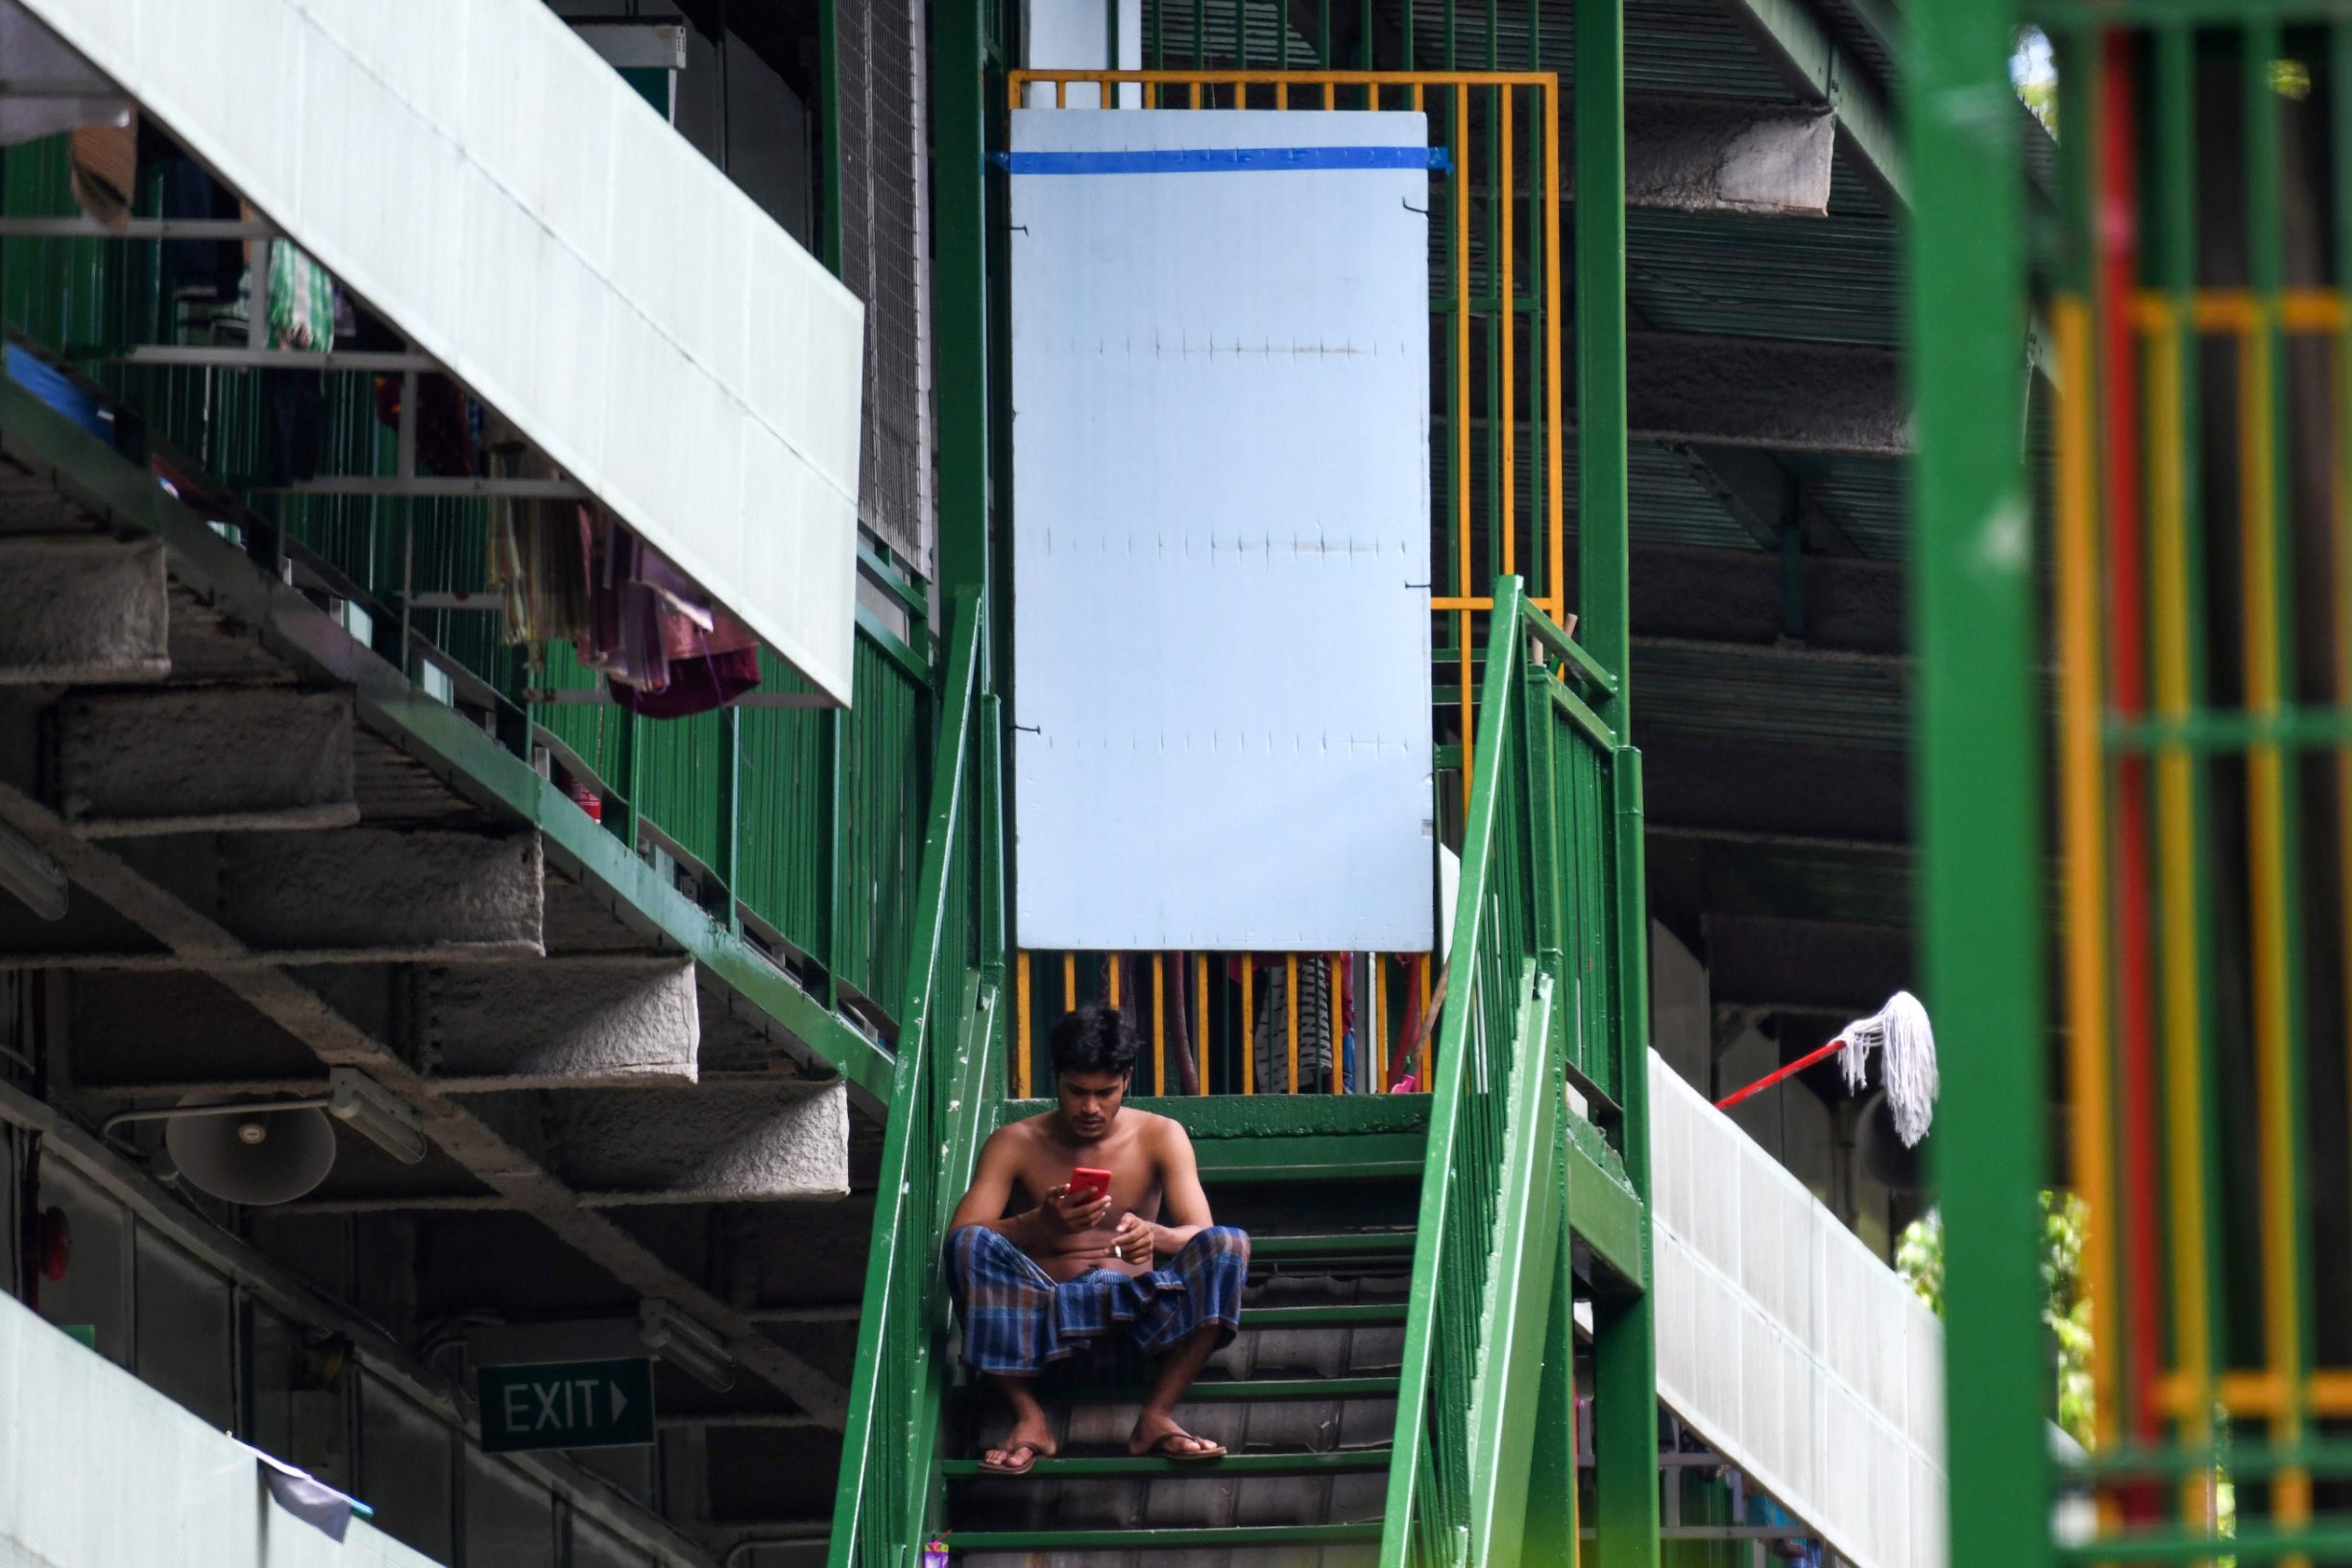 A migrant worker rest on the staircase after lunch break at the dormitories that houses foreign workers and has been made into an isolation area to prevent the spread of the COVID-19 coronavirus in Singapore on April 22, 2020. (Photo by Roslan RAHMAN / AFP)